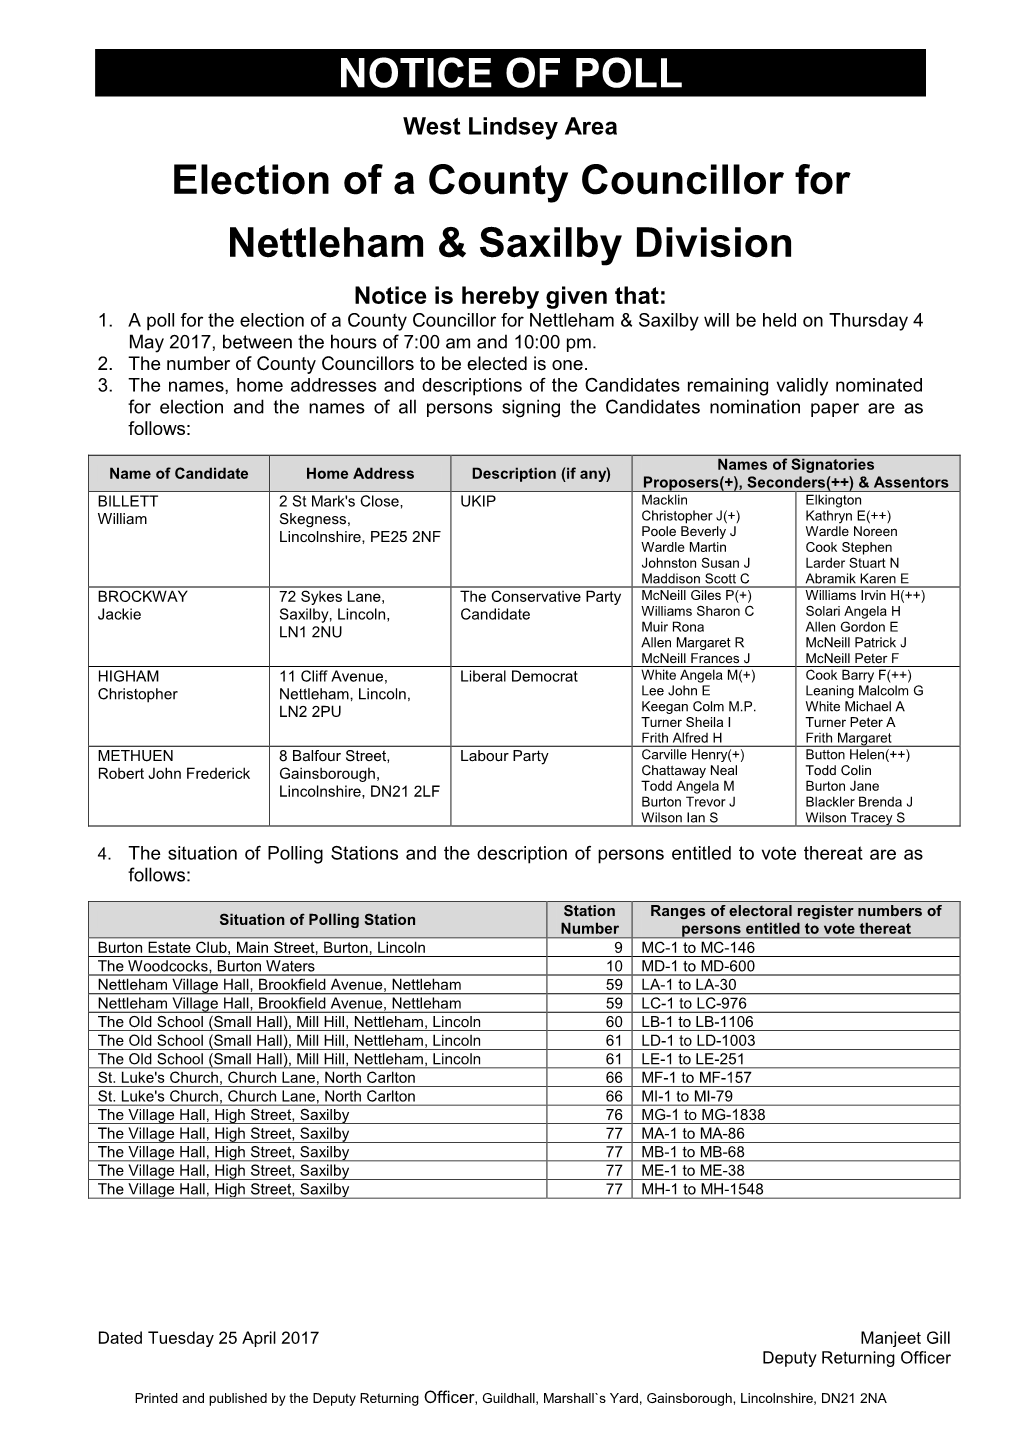 NOTICE of POLL West Lindsey Area Election of a County Councillor for Nettleham & Saxilby Division Notice Is Hereby Given That: 1